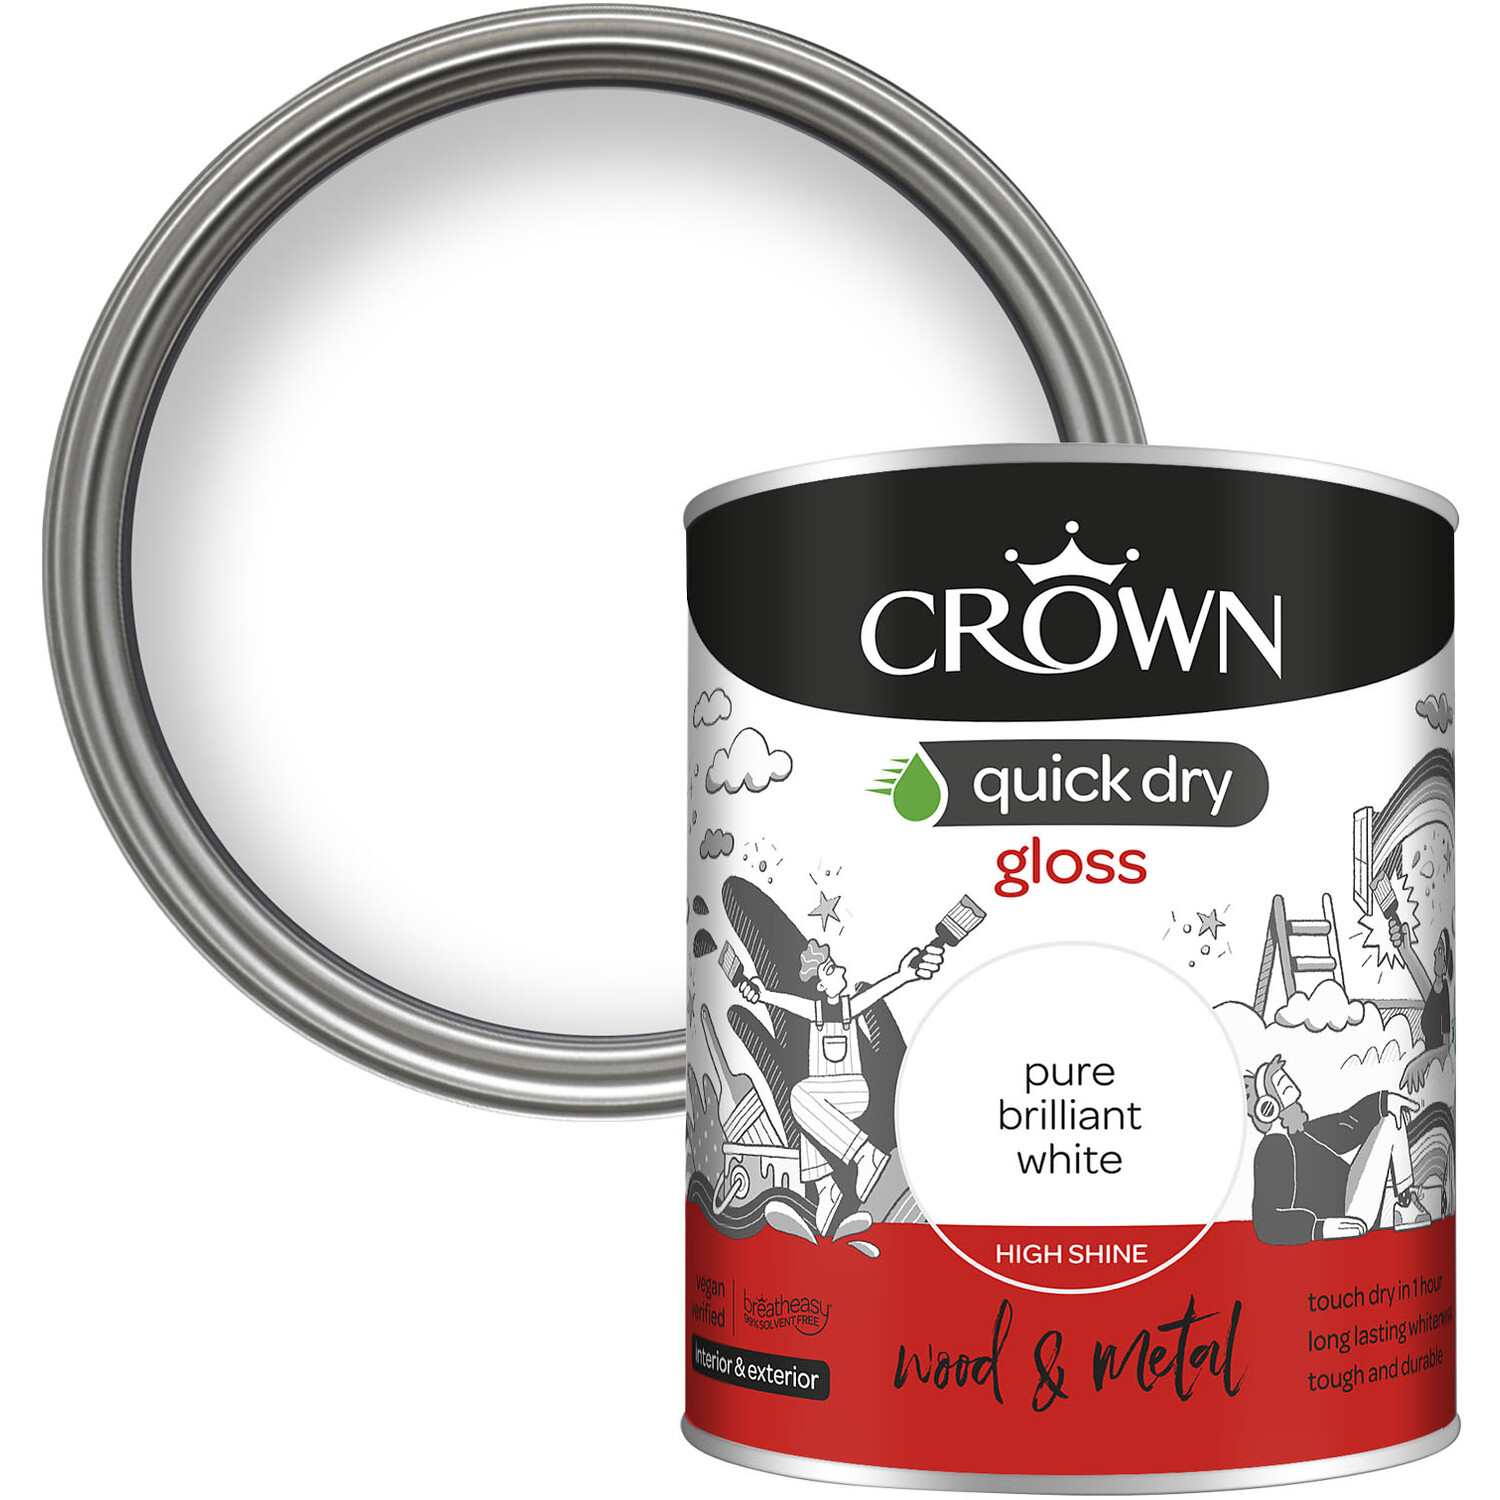 Crown Wood and Metal Pure Brilliant White Gloss Paint 750ml Image 1